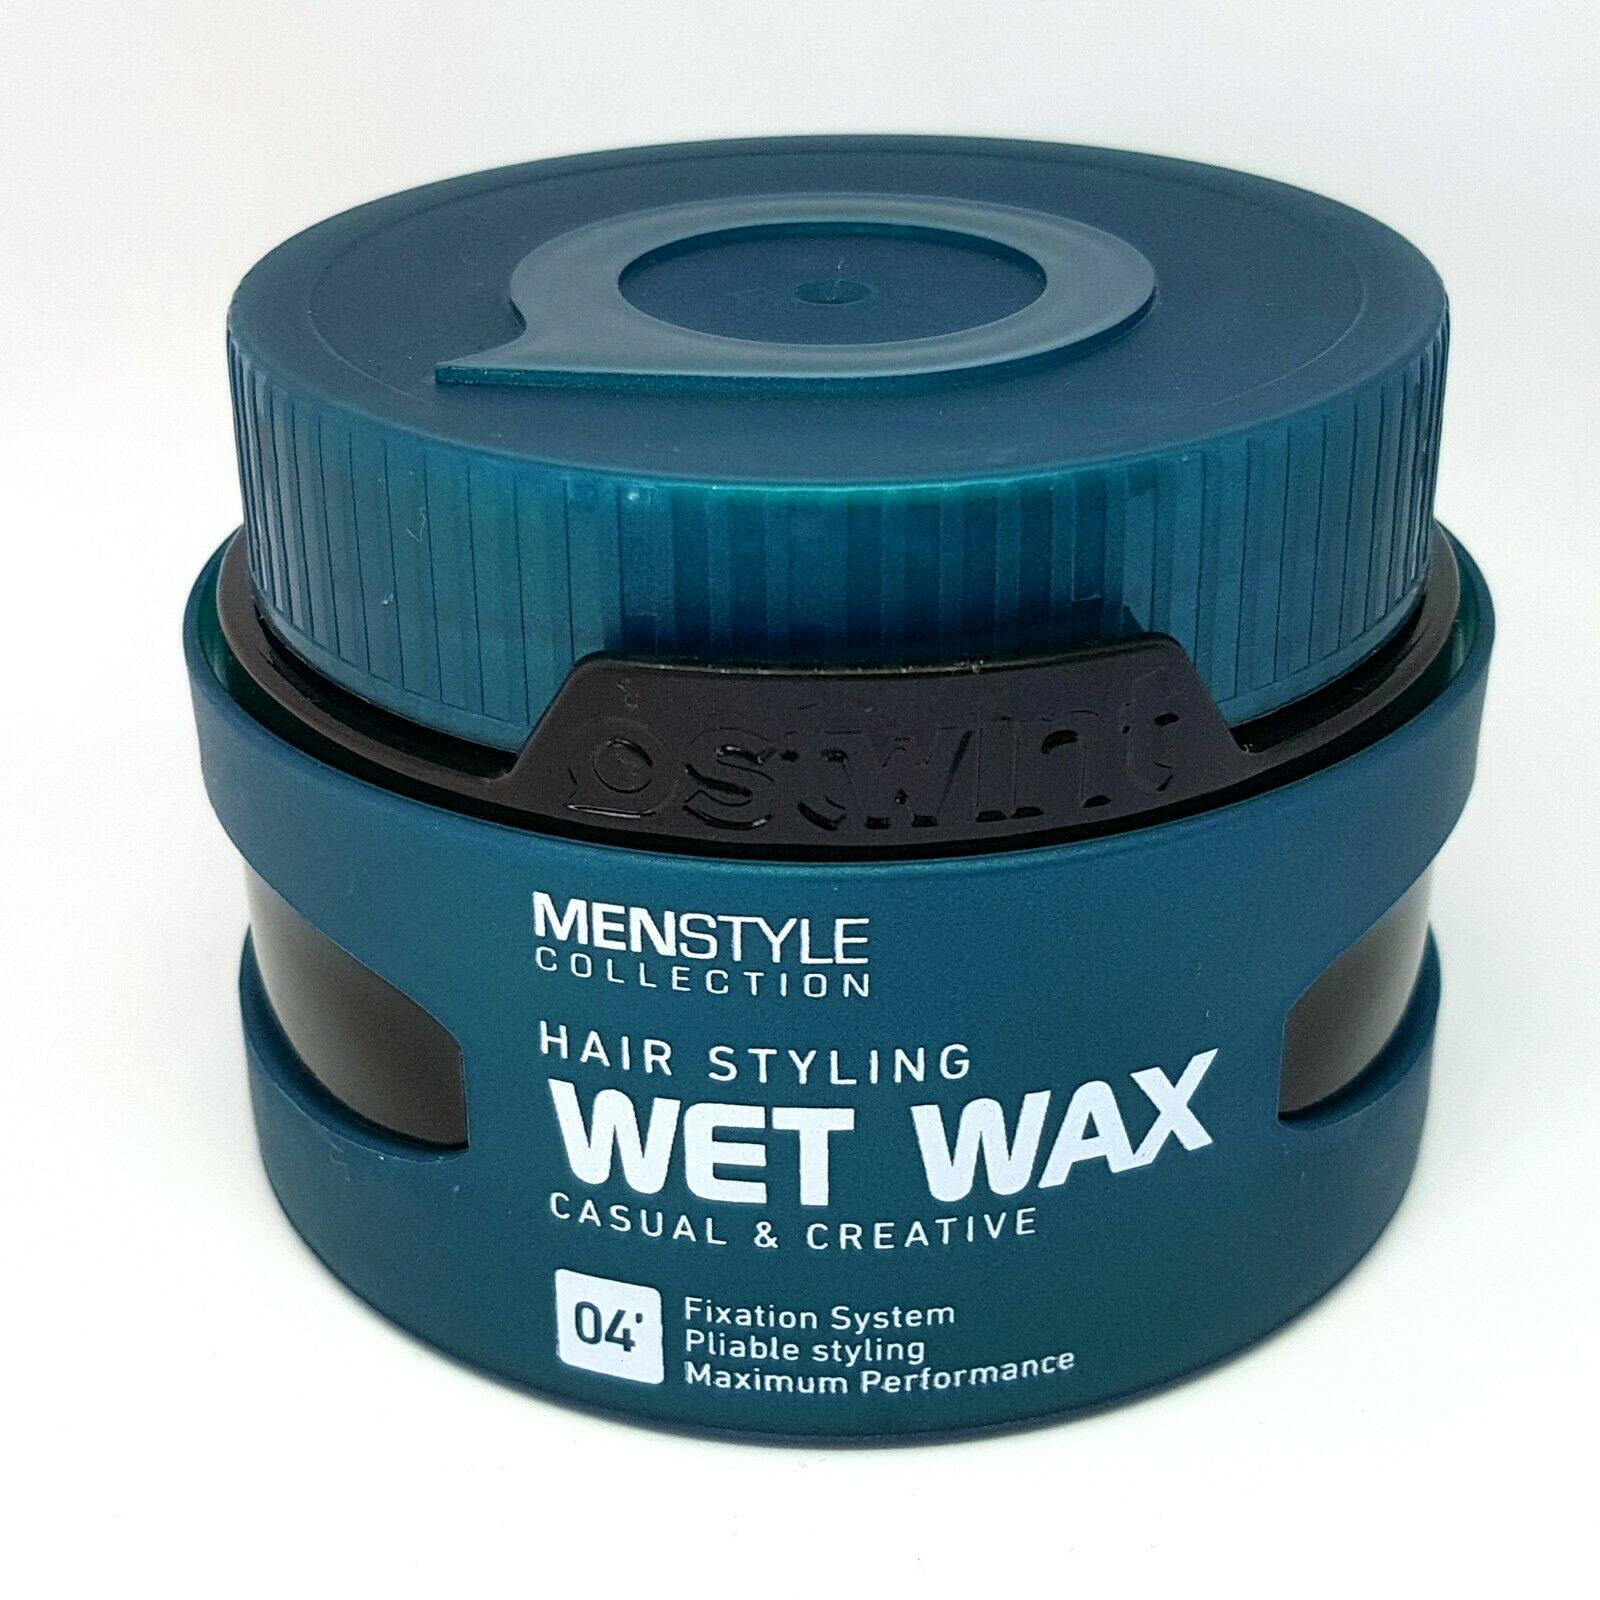 Menstyle Collection Hair Styling Wet Wax CASUAL & CREATIVE Ostwint strength  04 | Split7